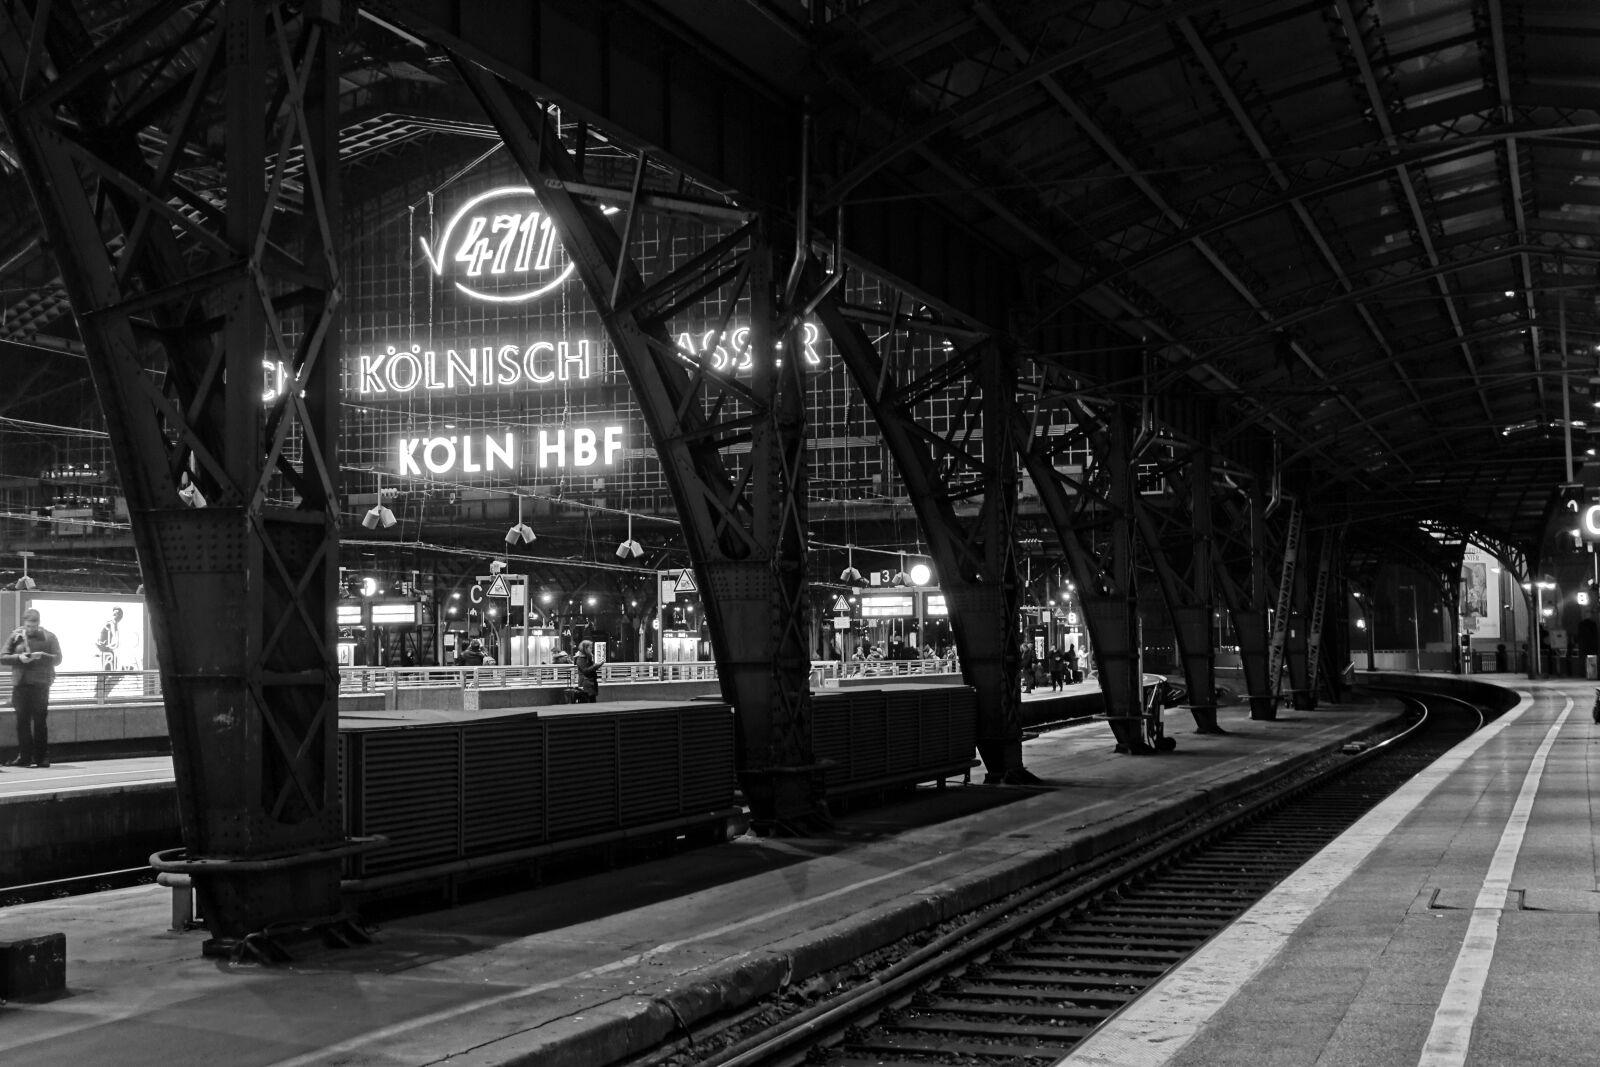 Sony DSC-RX100M5 sample photo. Central station, cologne, night photography